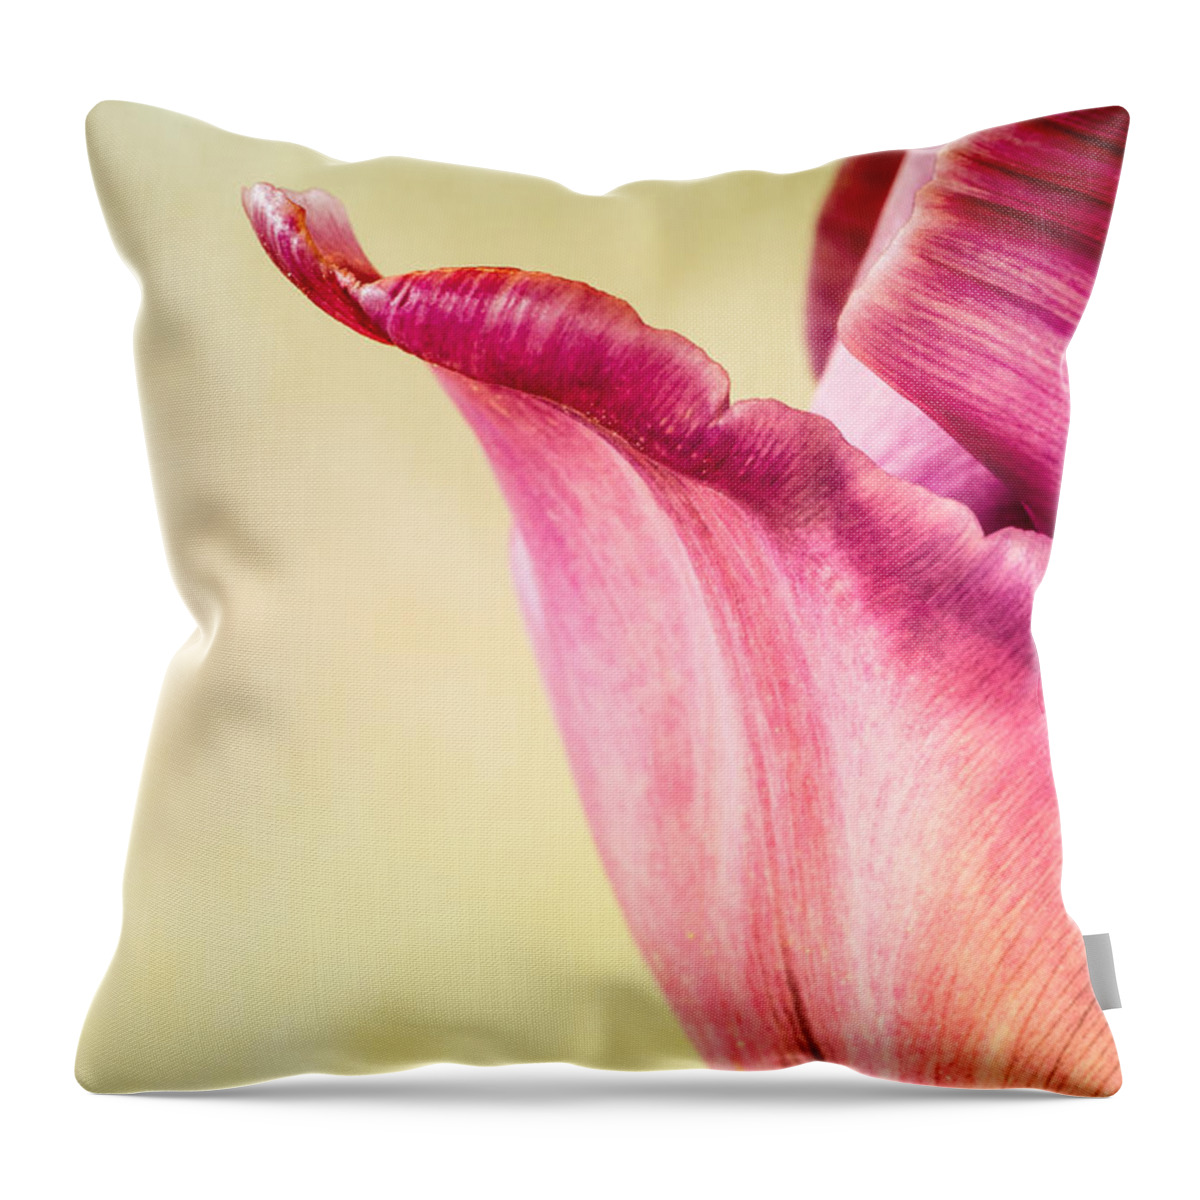 Tulips Throw Pillow featuring the photograph Tulip Petal by Georgette Grossman